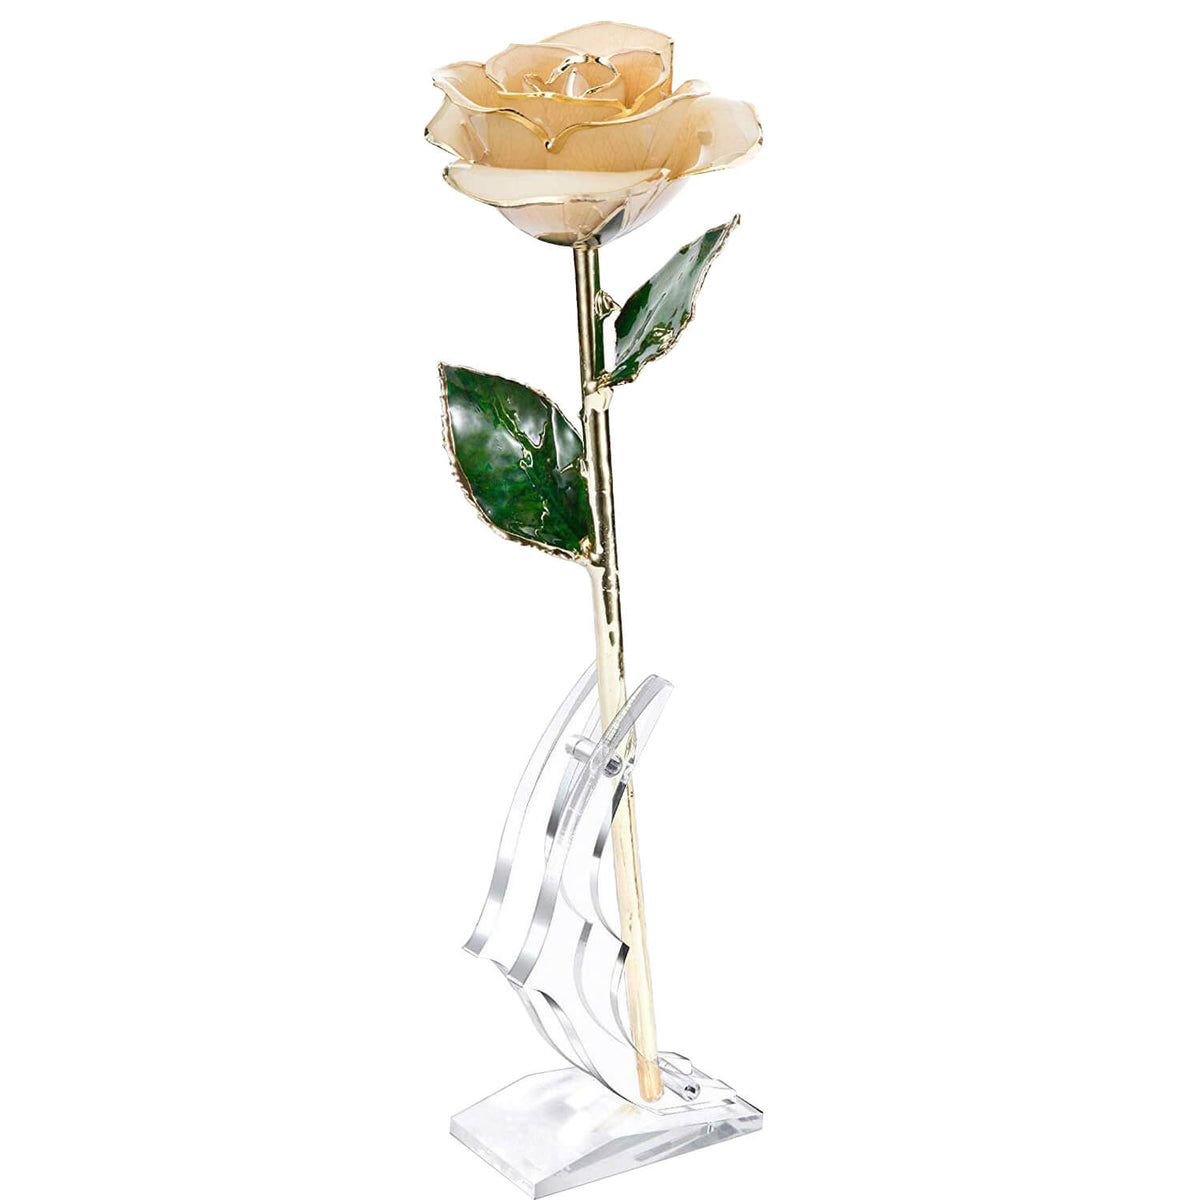 Mother's Day gifts | 24K Gold Dipped Rose | Gifts for Her/Wife/Mom